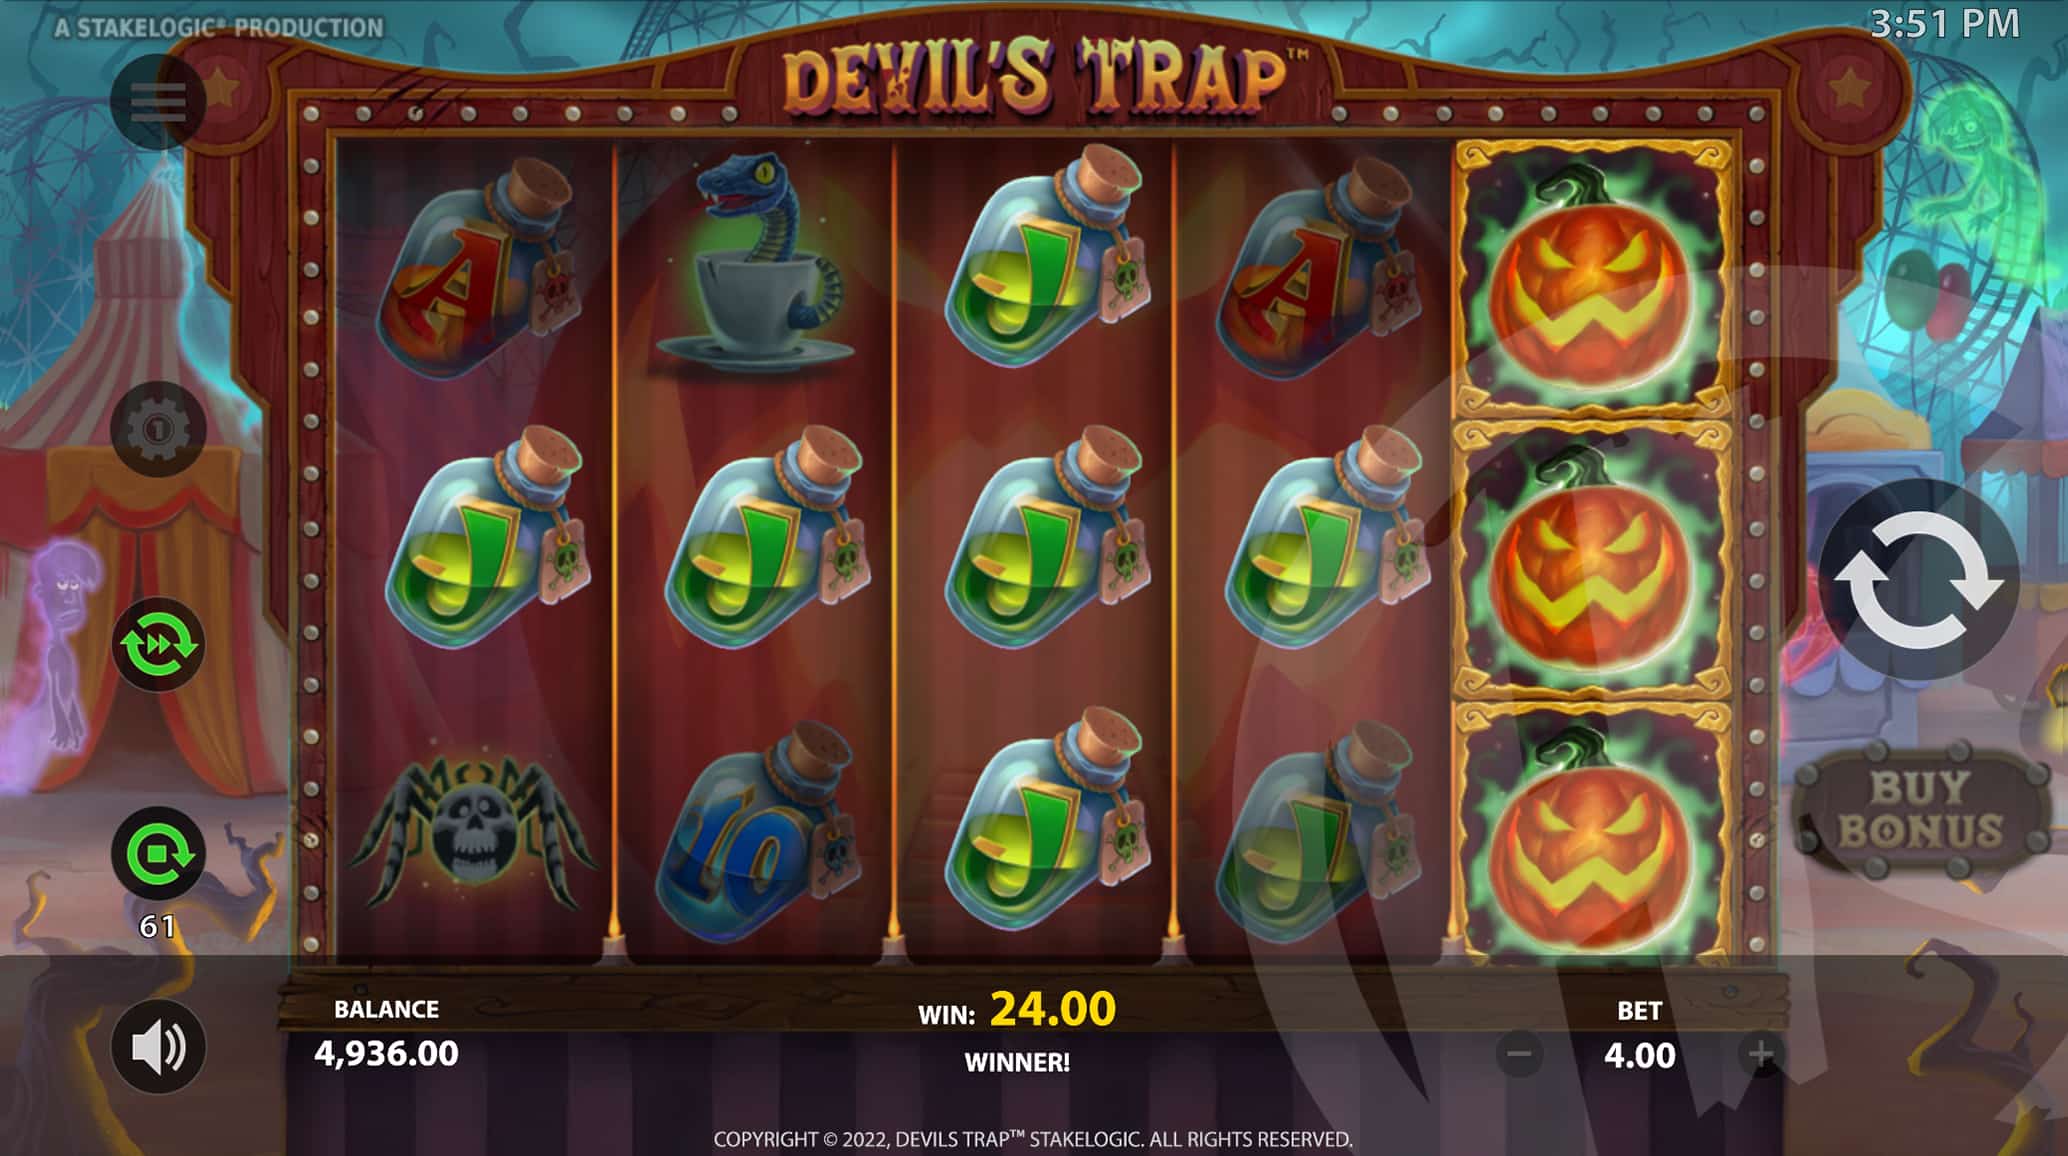 Devil's Trap Offers Players 20 Fixed Win Lines